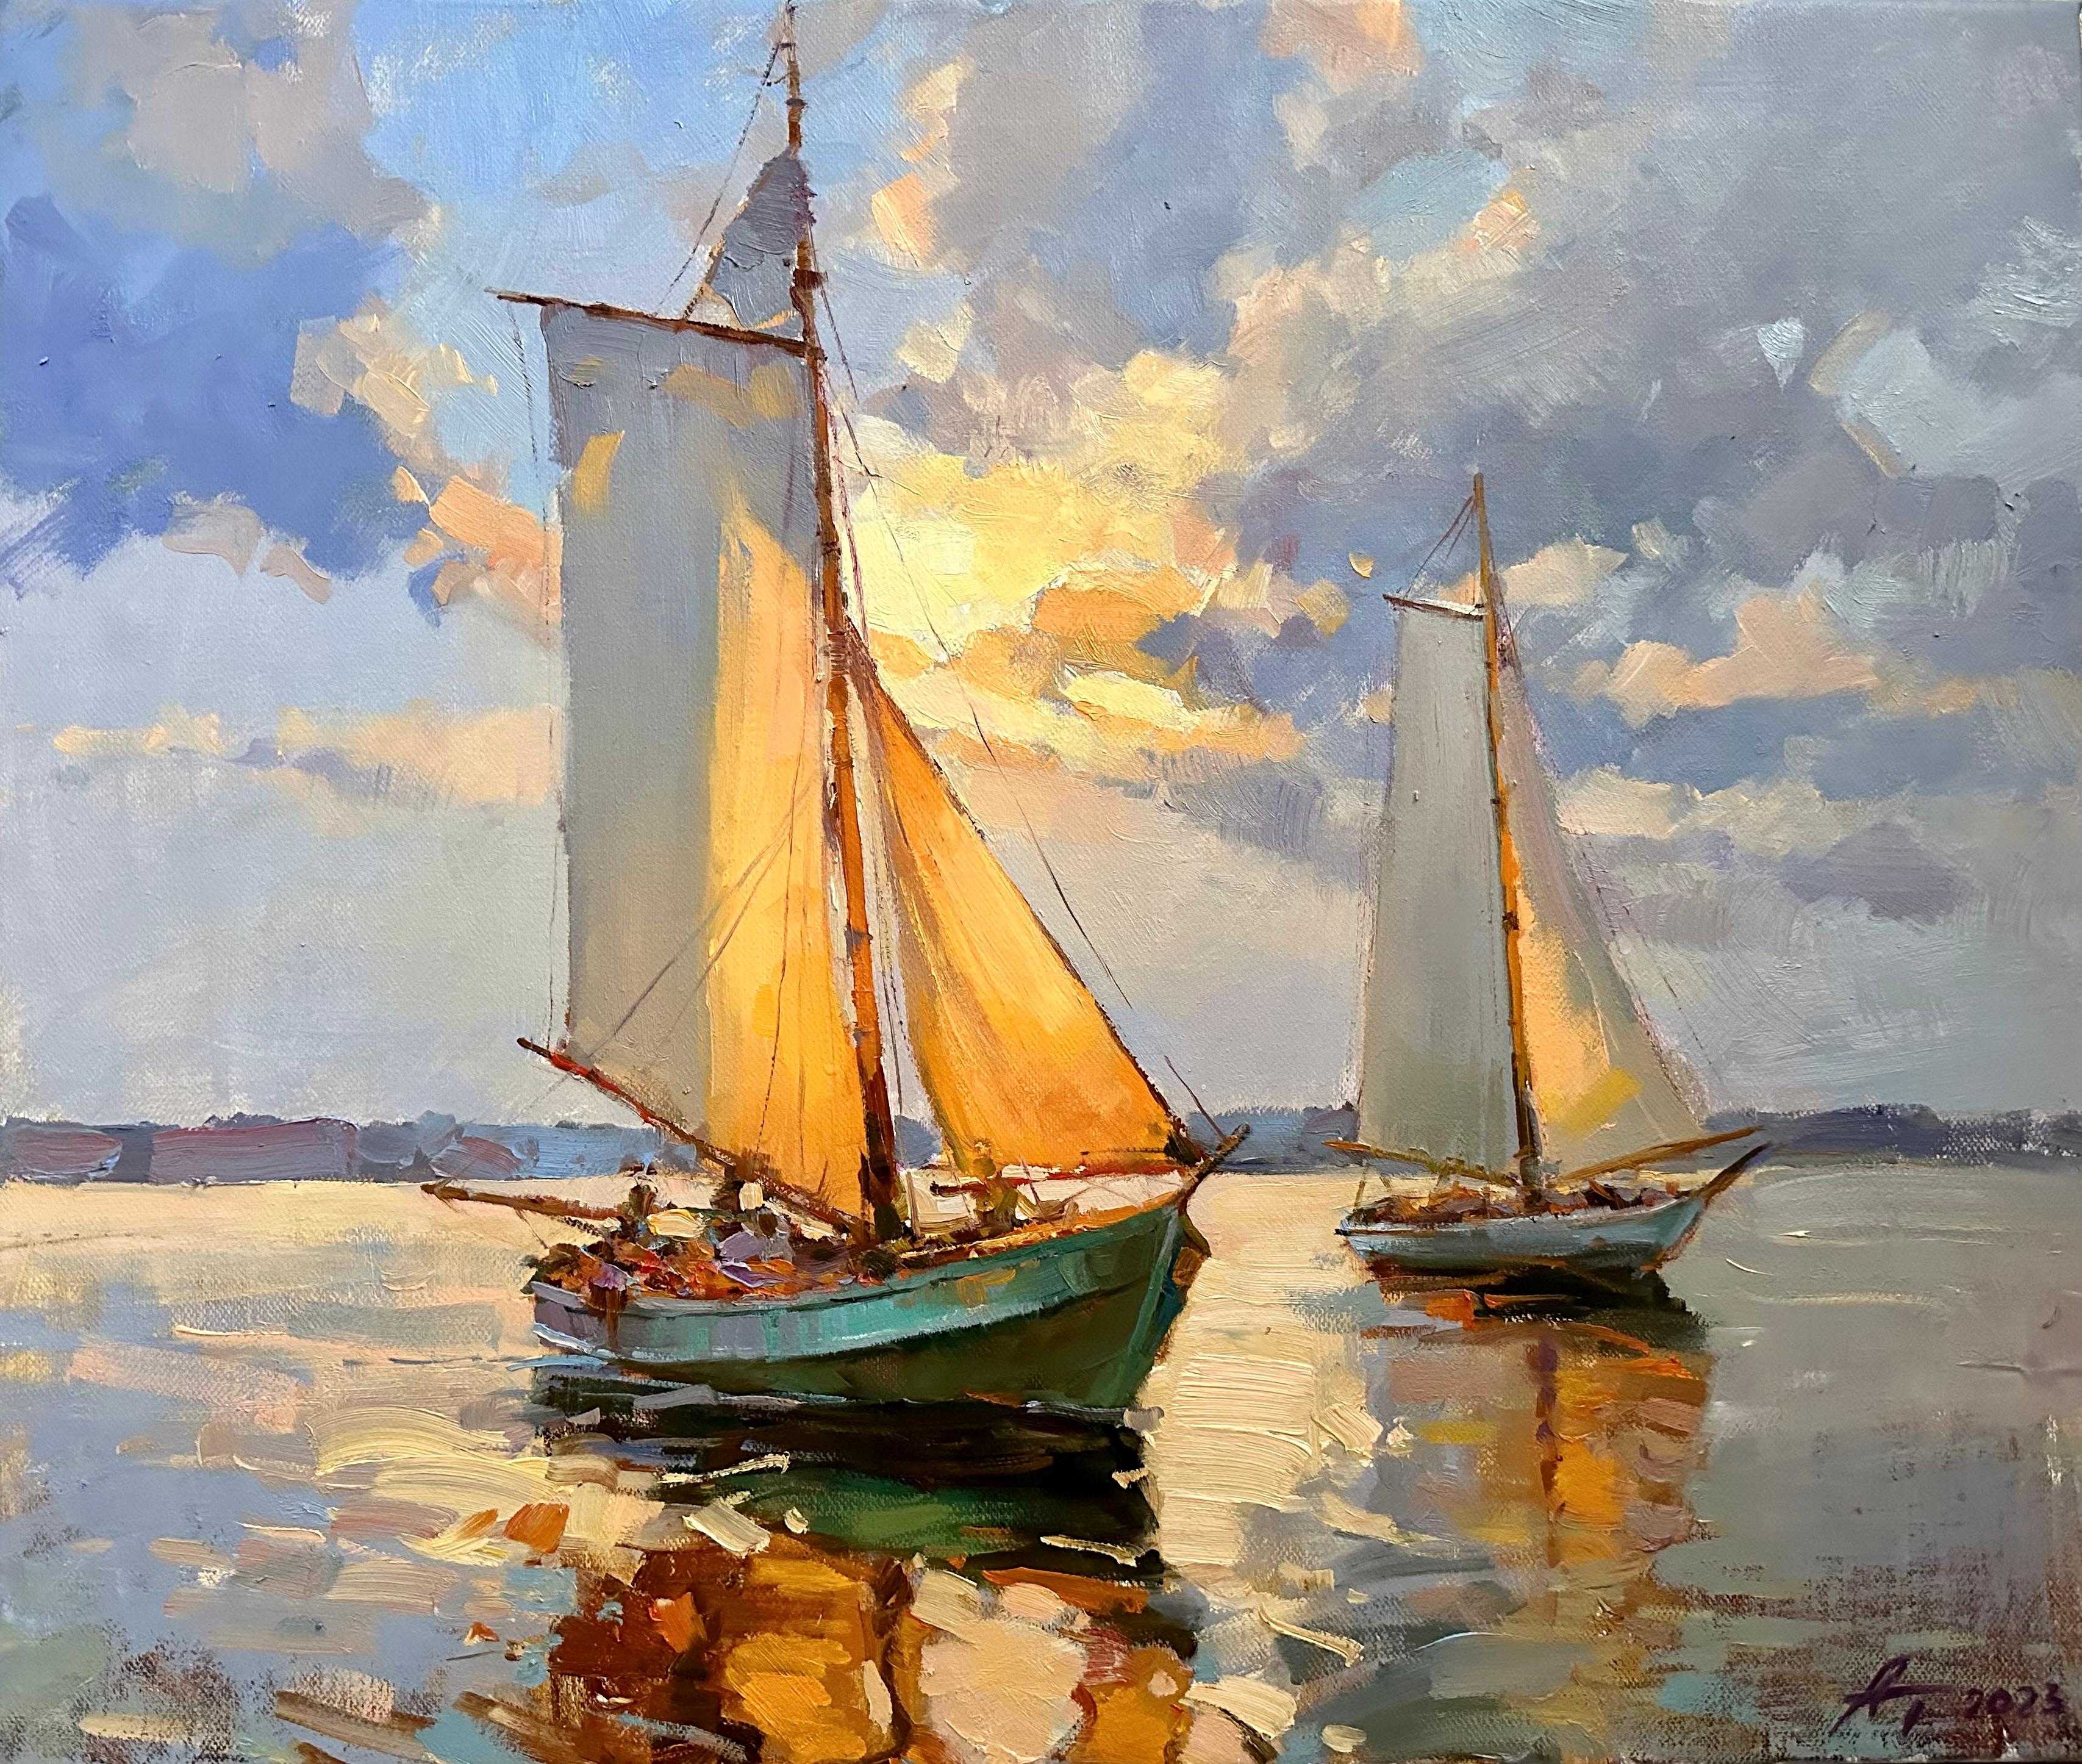 "Light Wind in the Sails" is a painting depicting the moment when boats gently sway under the influence of a soft breeze, filling their sails. The light-blue sky provides a backdrop for this scene, and gentle clouds dance in harmony with the wind.